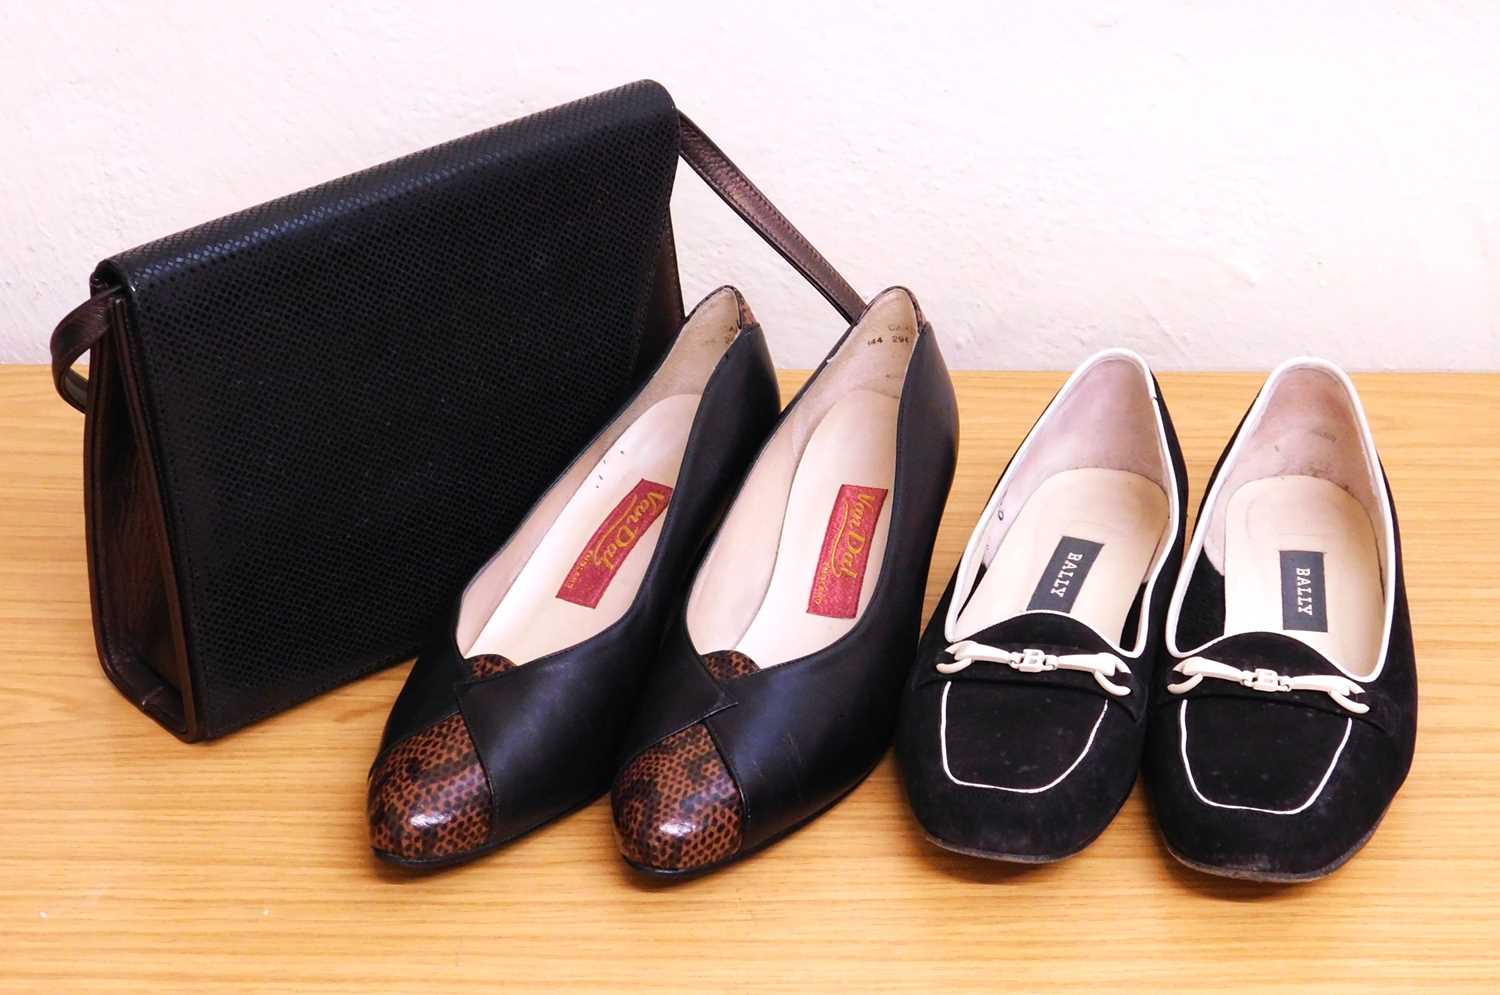 A pair of Bally black and cream low heel loafers, size 5 1/2, together with a pair of Van Dal